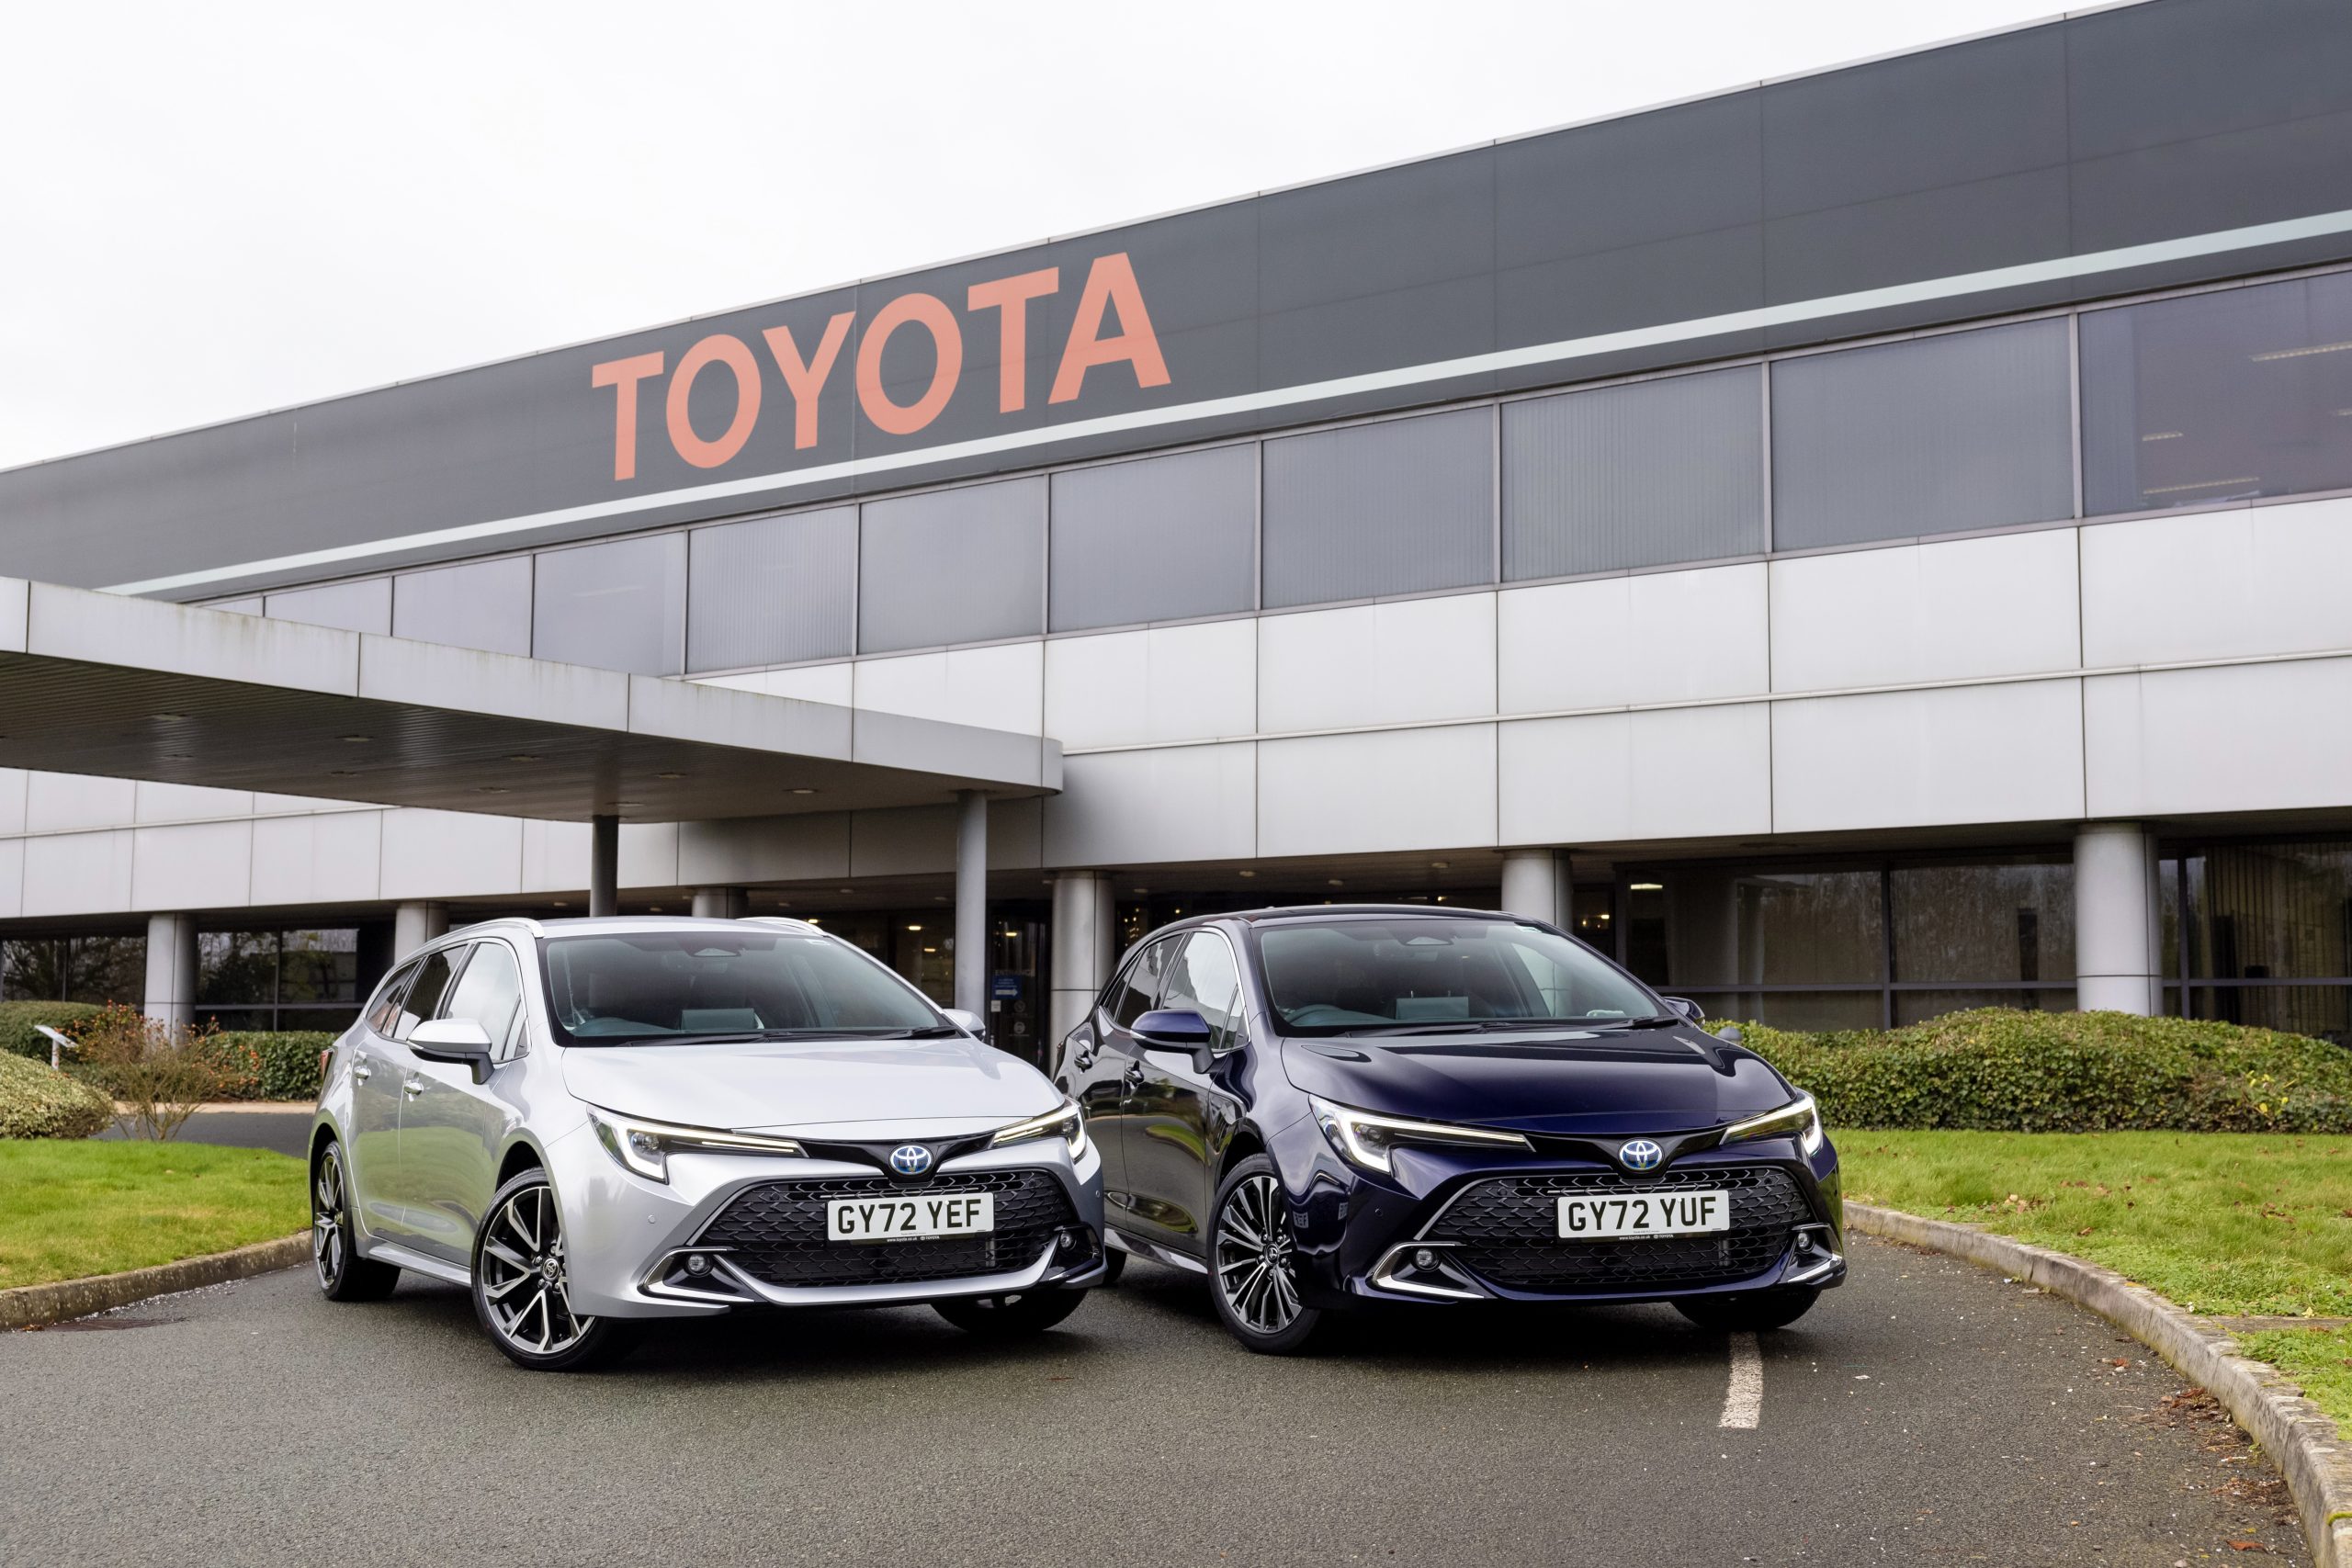 Toyota launches the new Corolla with fifth generation hybrid electric technology